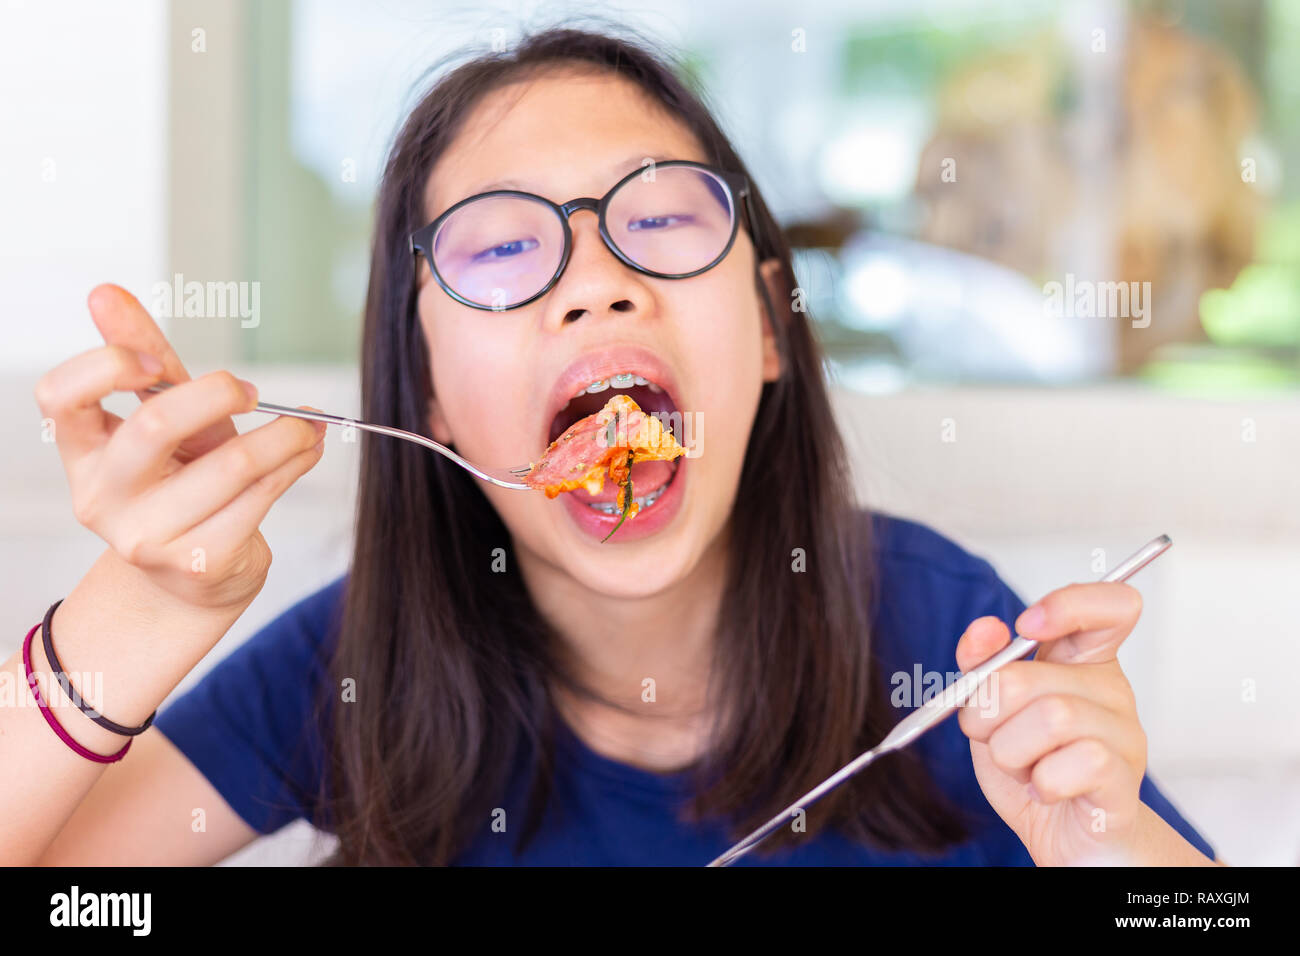 Young female teenager eating her pepperoni pizza for lunch at restaurant using fork and knife, good for health concept Stock Photo